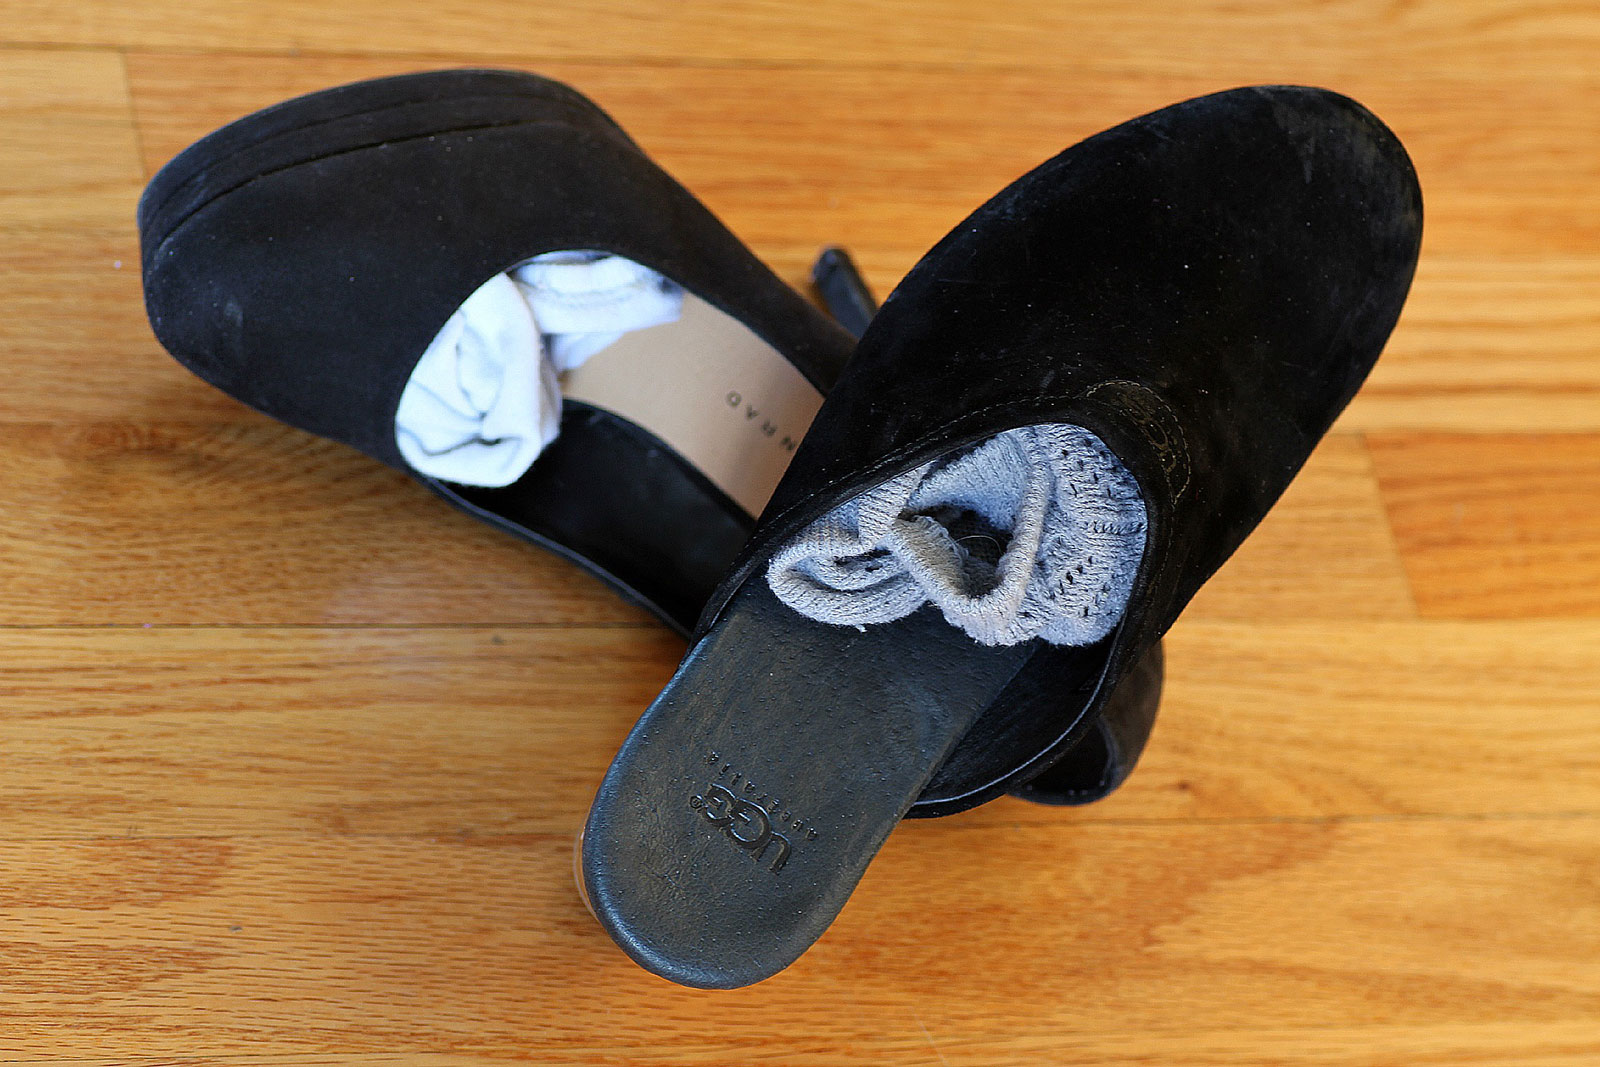 Put socks and underwear inside your shoes when you pack to save space.